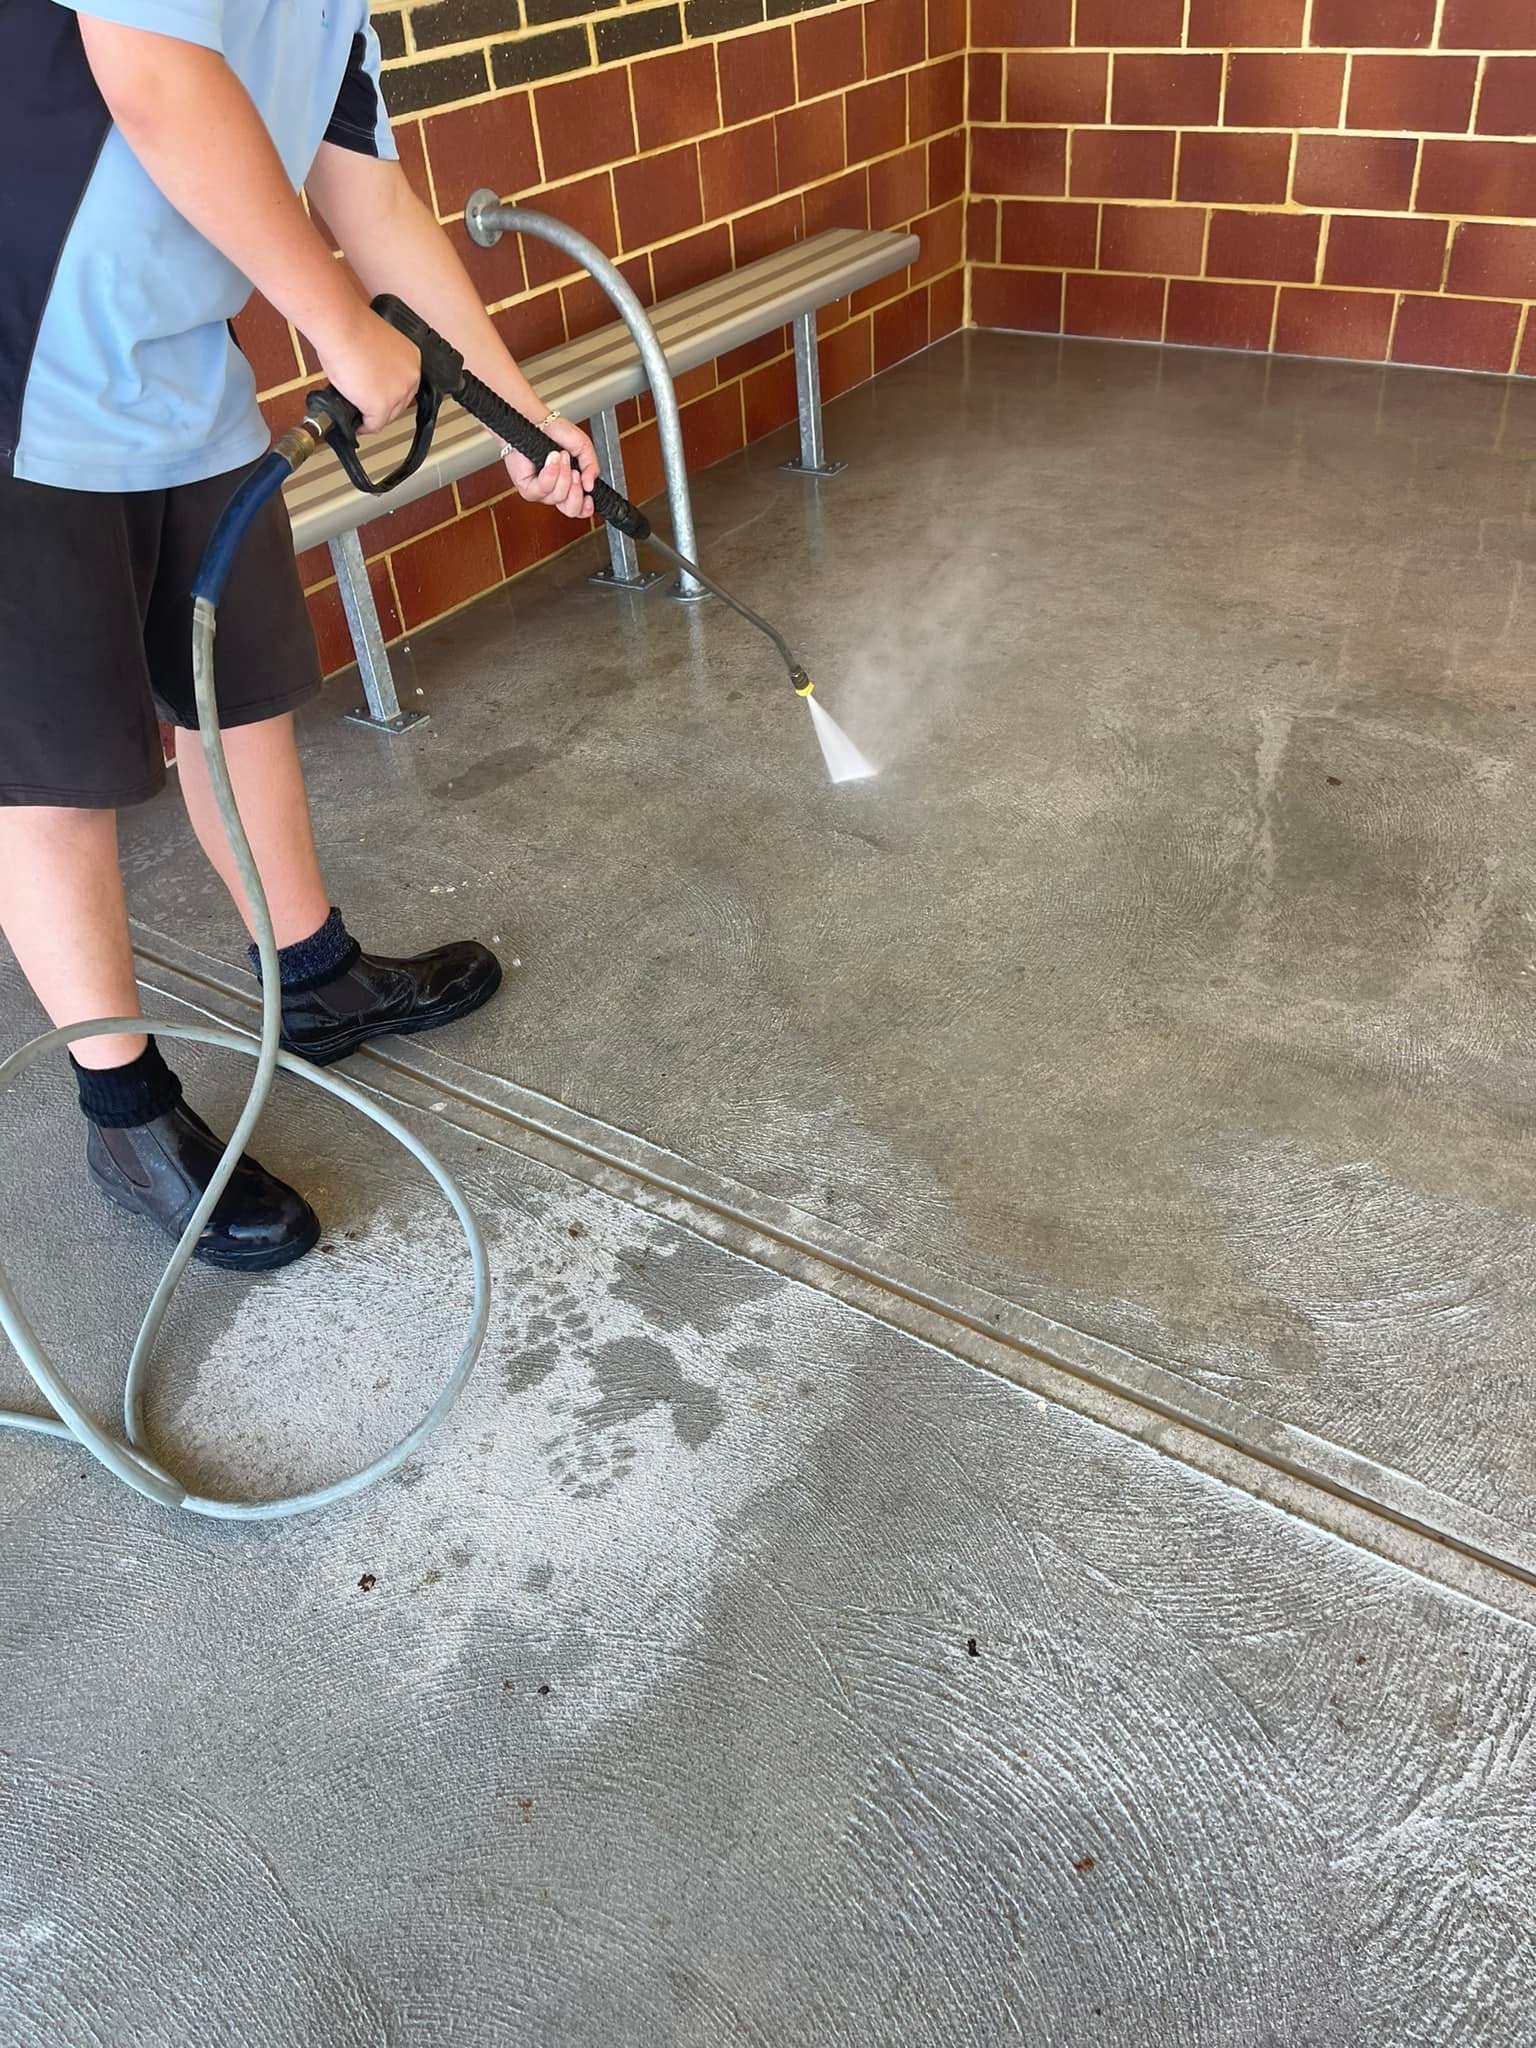 Power Washing Your Home